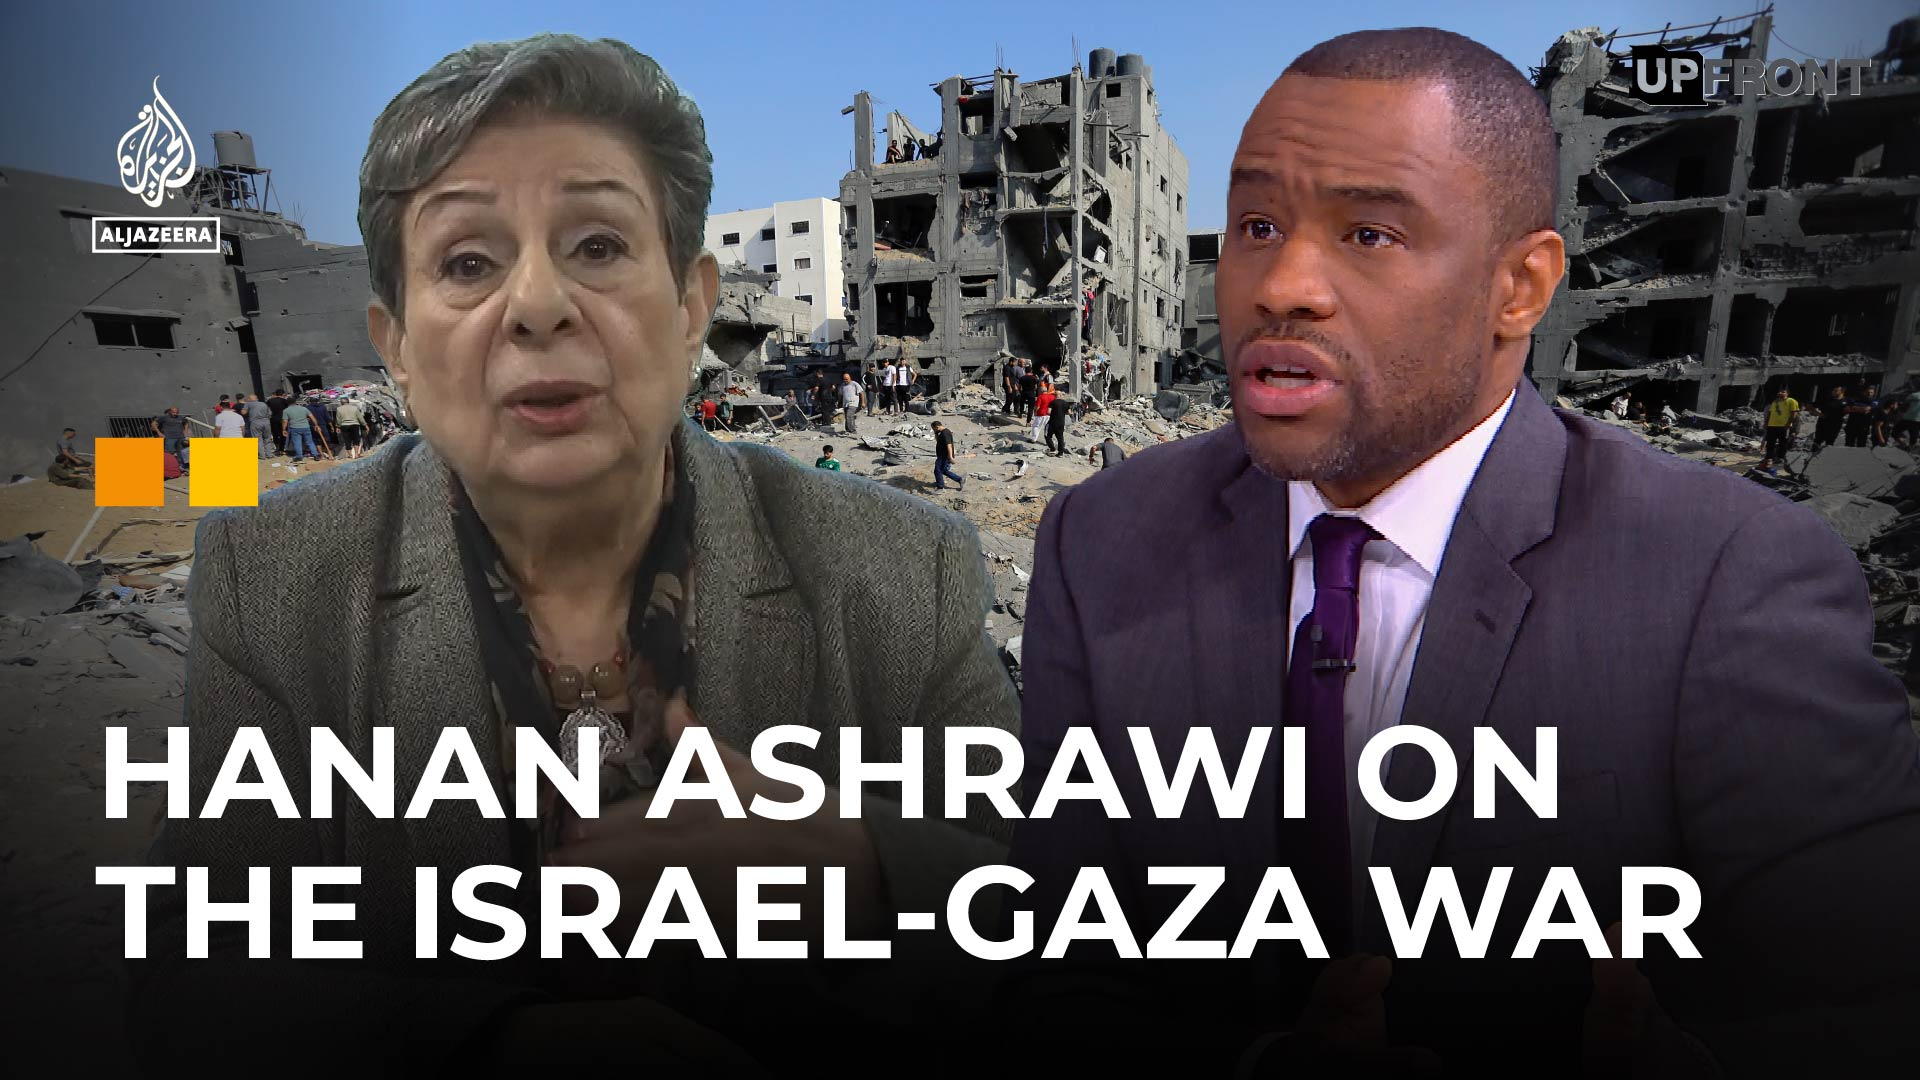 Israel-Gaza war: Is the US administration divorced from reality? | UpFront